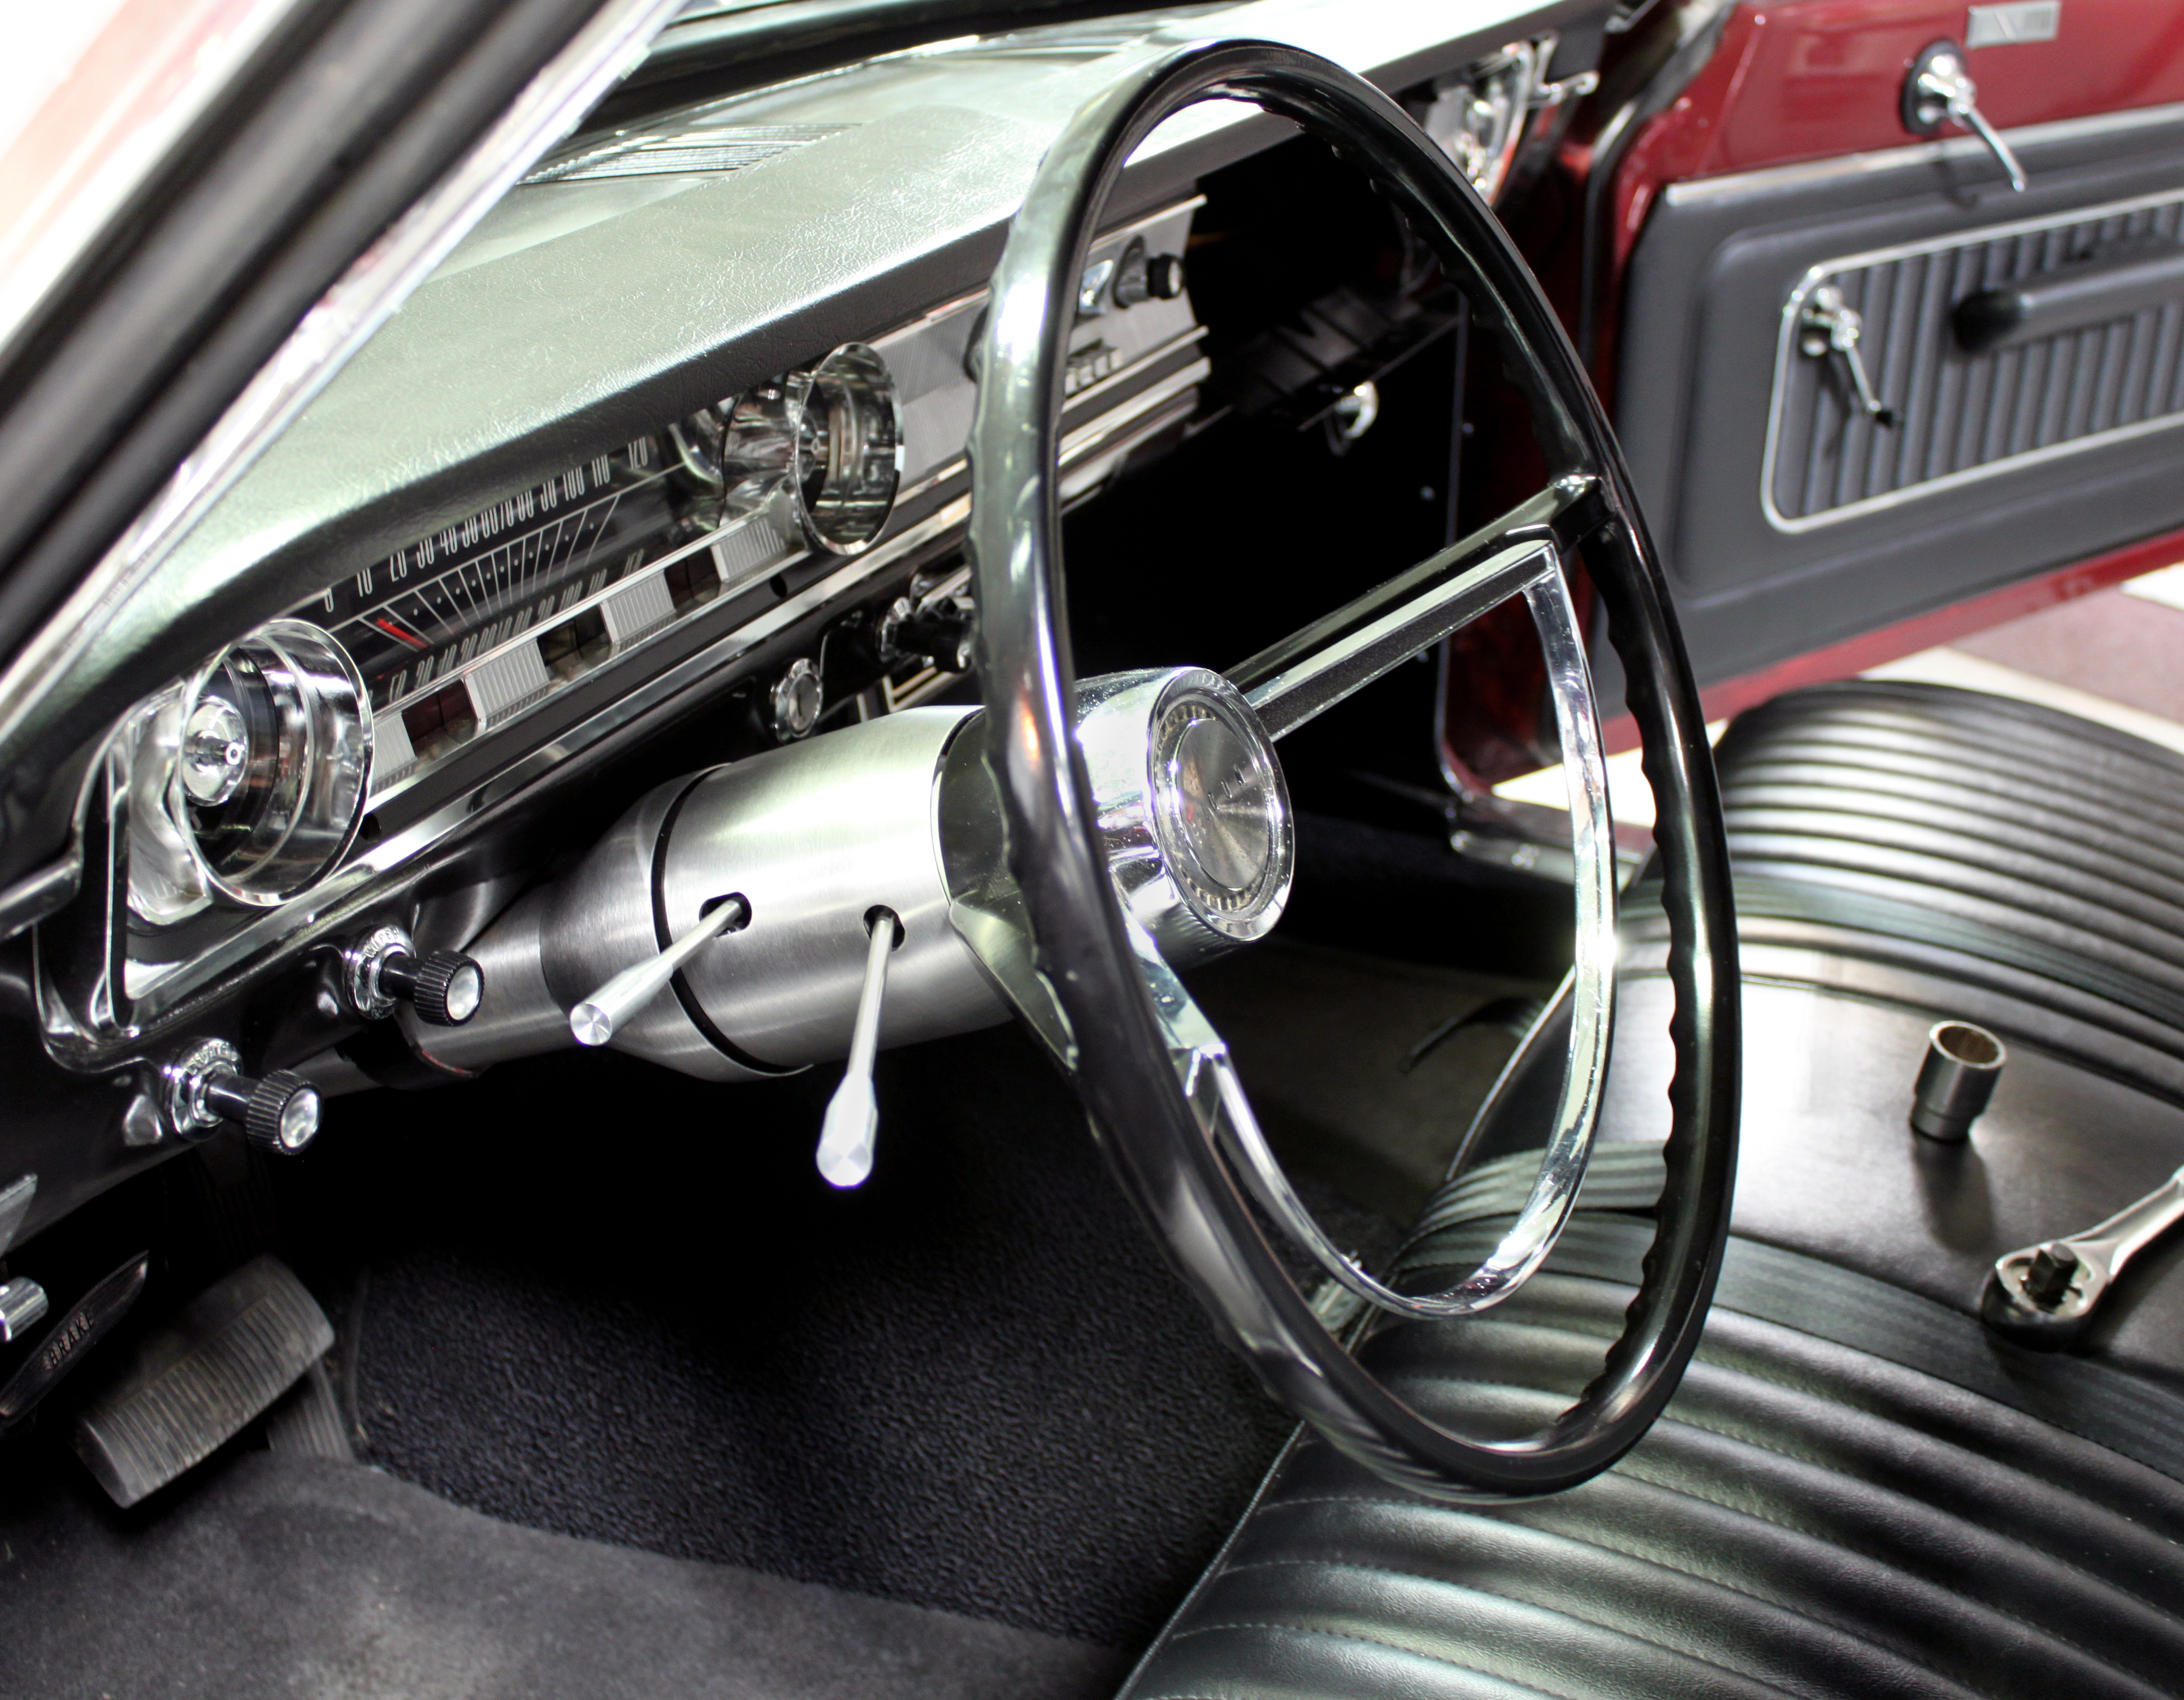 SEMA Preview: ididit to Introduce New Tilt Steering Column ... 1950 ford truck wiring harness 